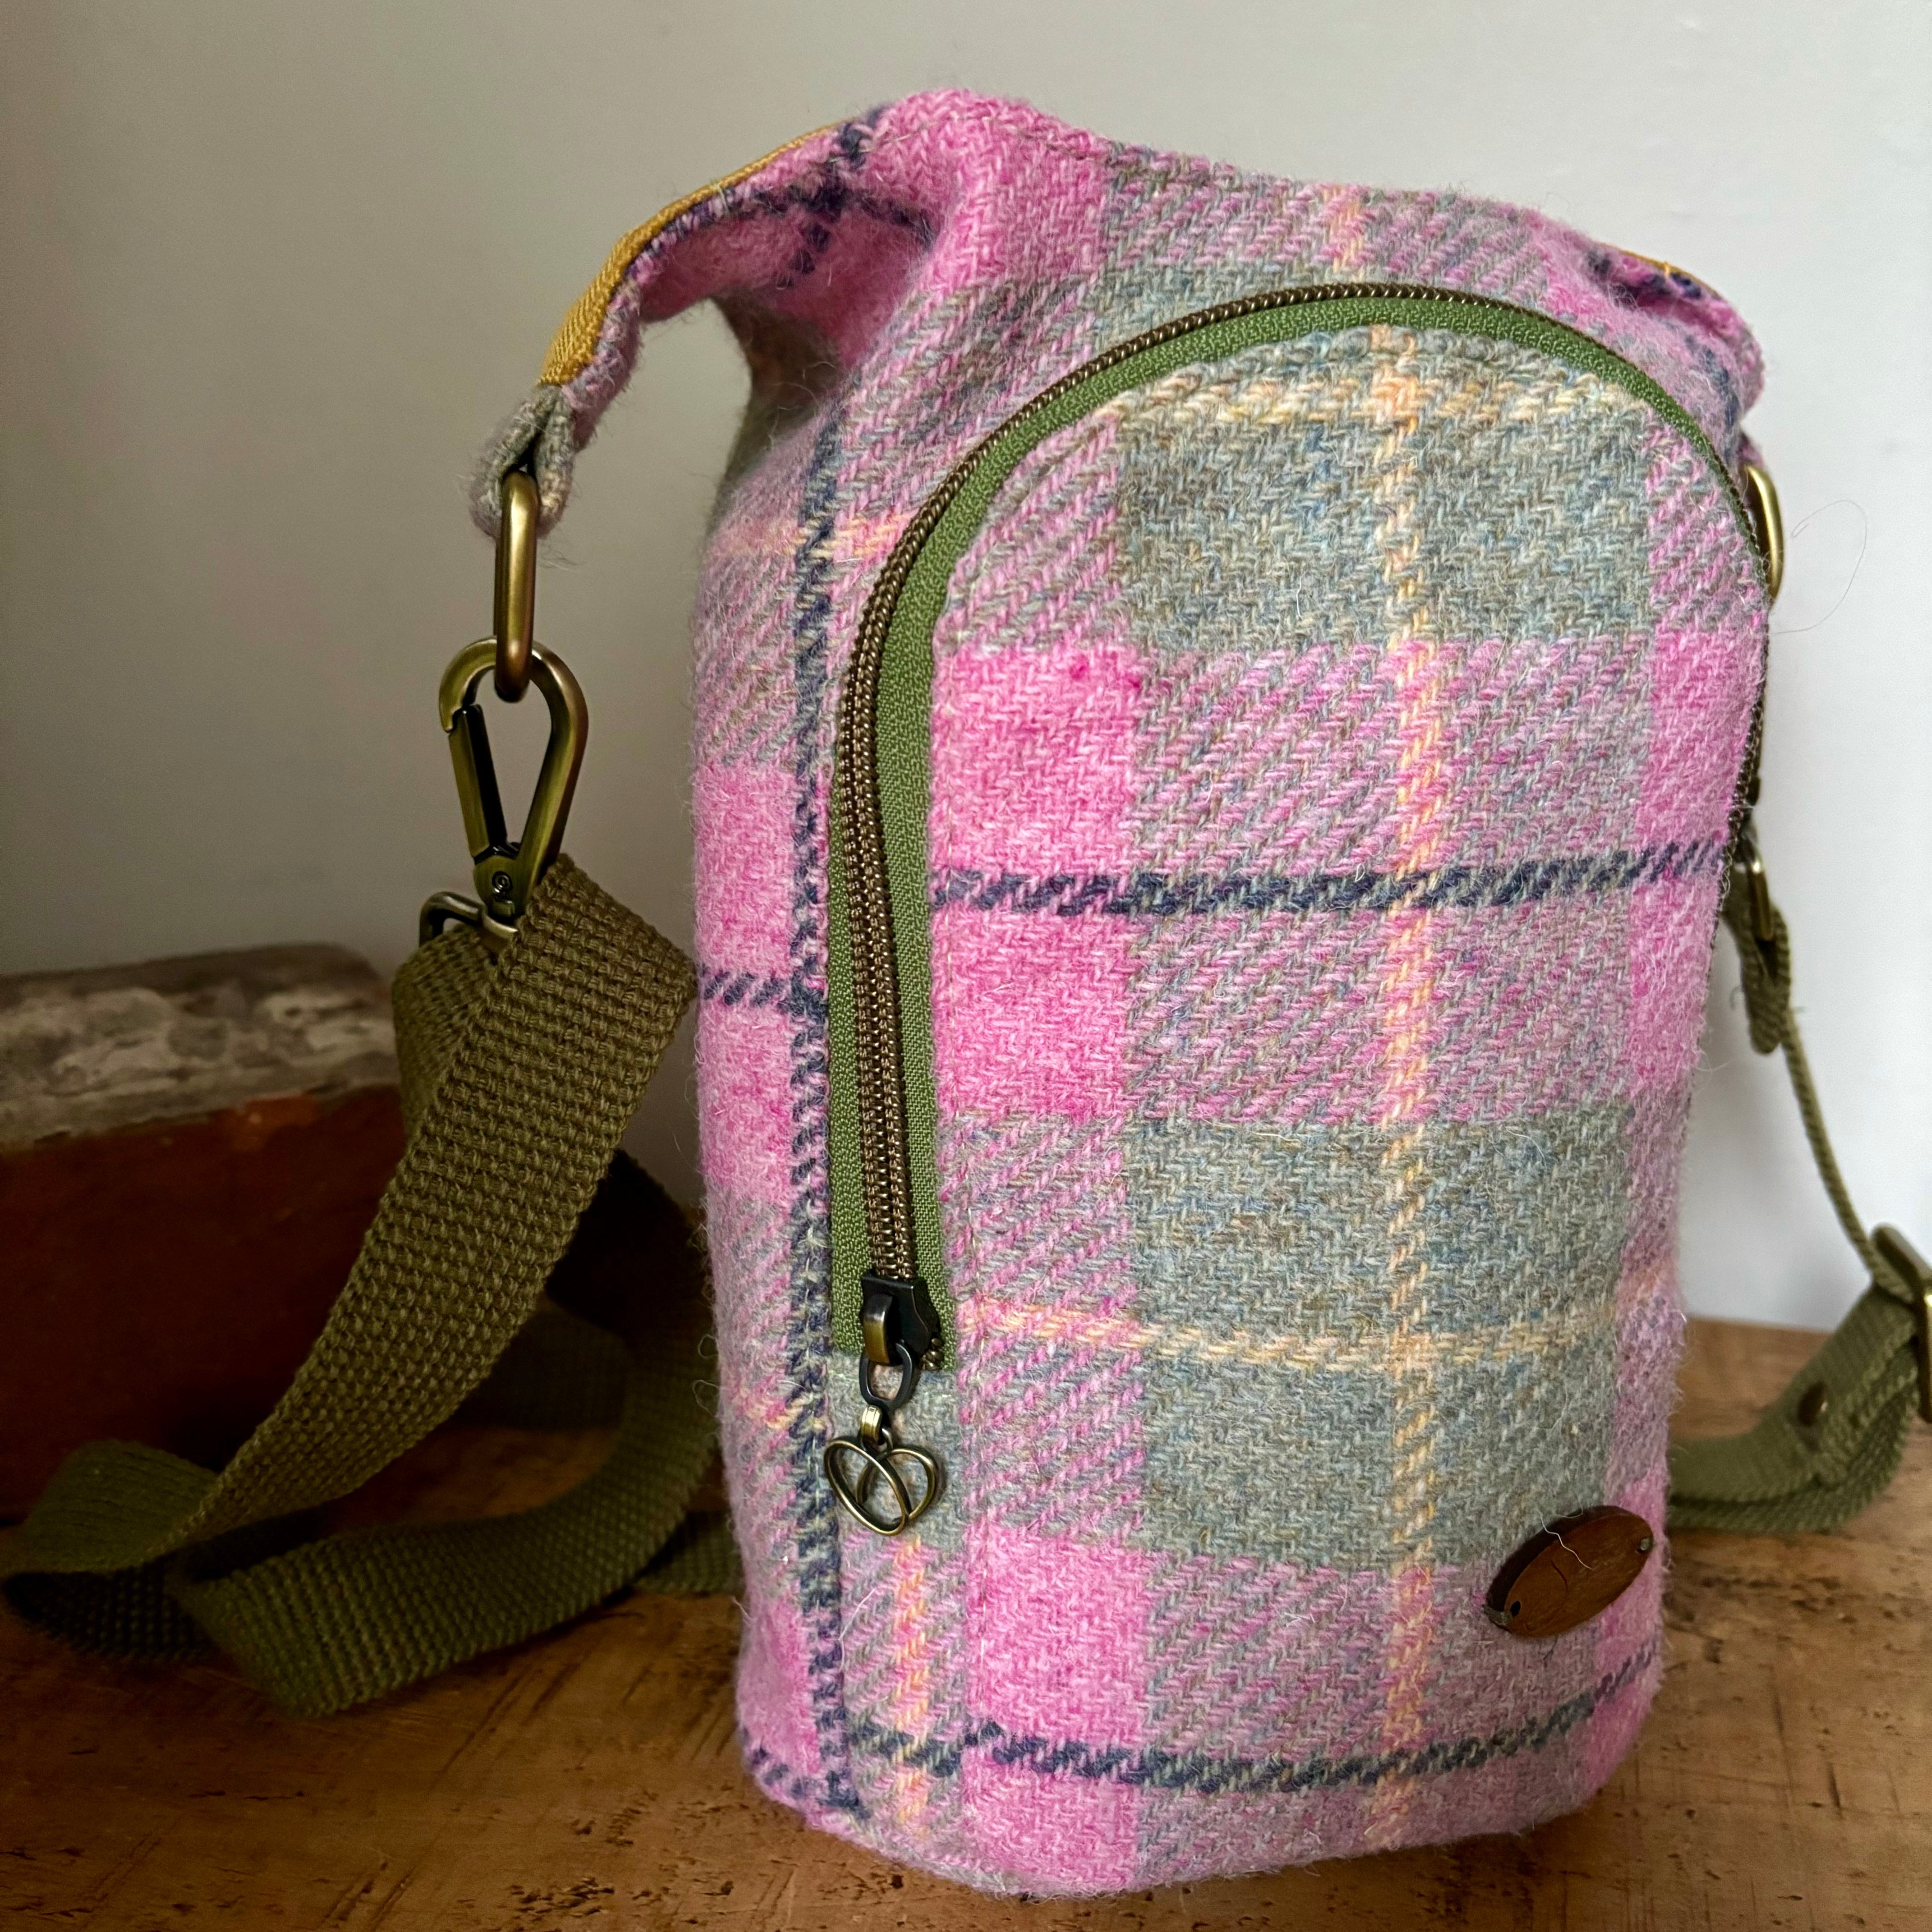 Limited Edition Sparkling Spirit Harris Tweed Bottle Bag in pastel pink, green, yellow with a stripe of blue